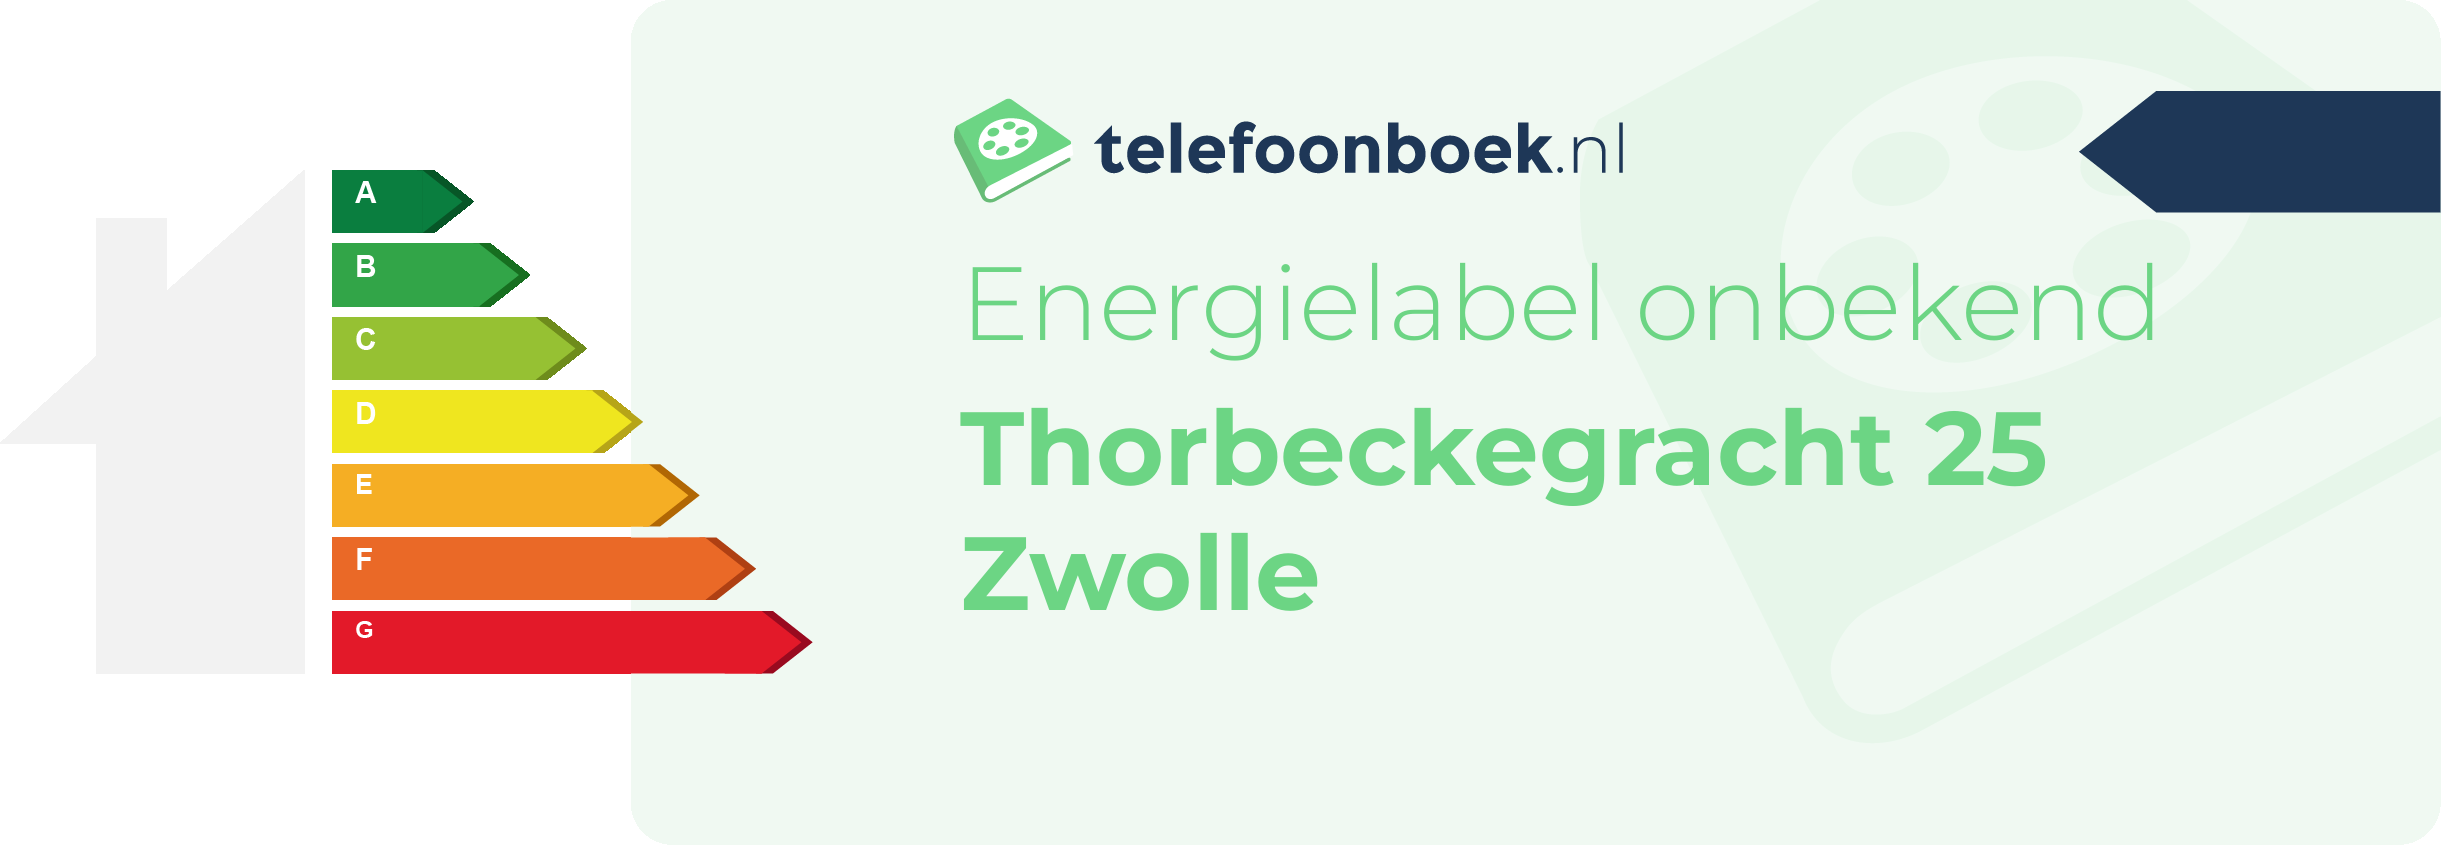 Energielabel Thorbeckegracht 25 Zwolle